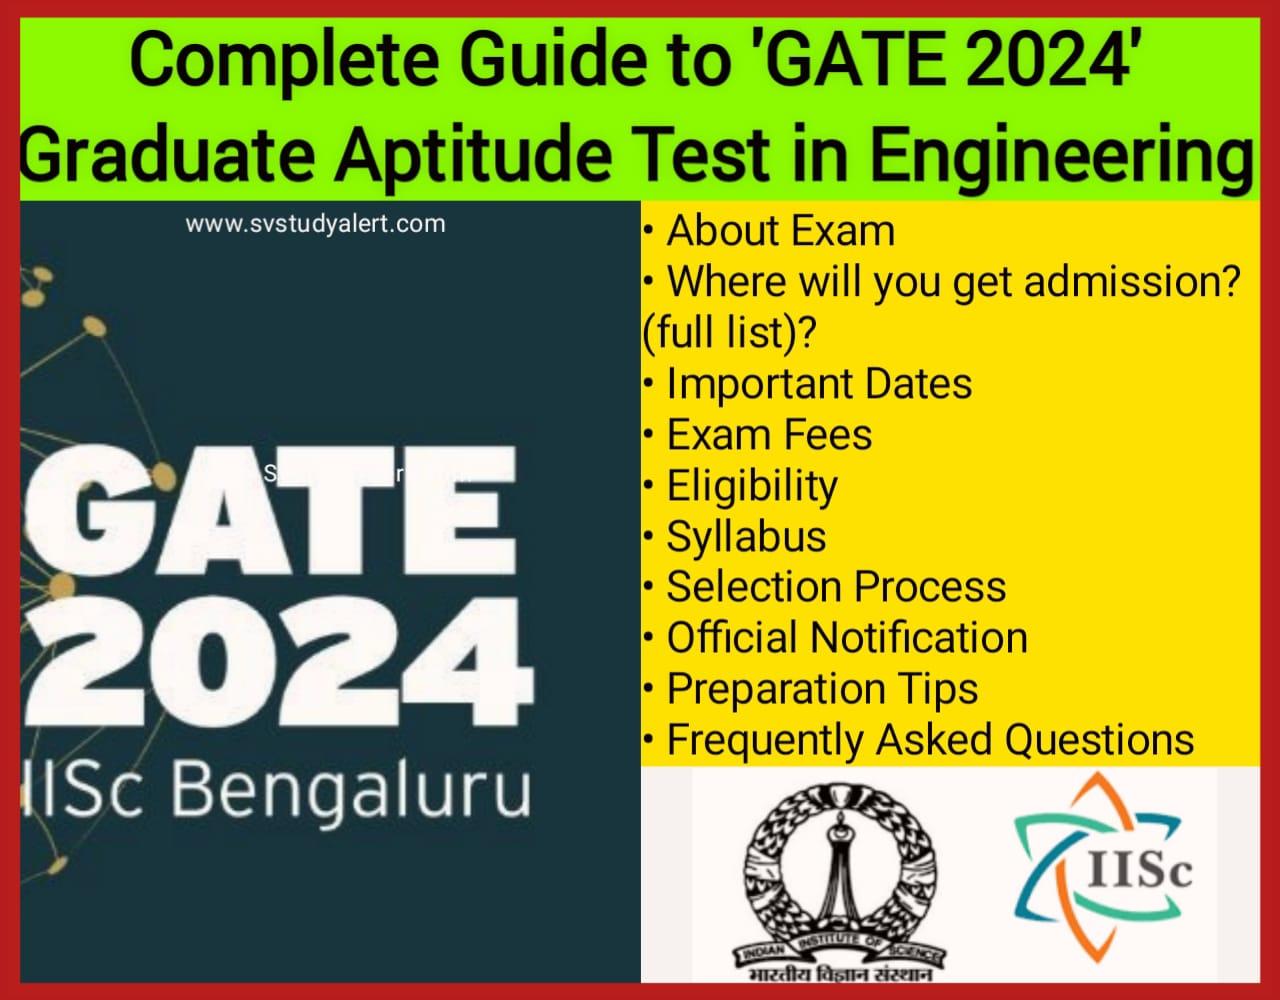 Unlocking Opportunities: A Complete Guide to GATE 2024 - Graduate Aptitude Test in Engineering